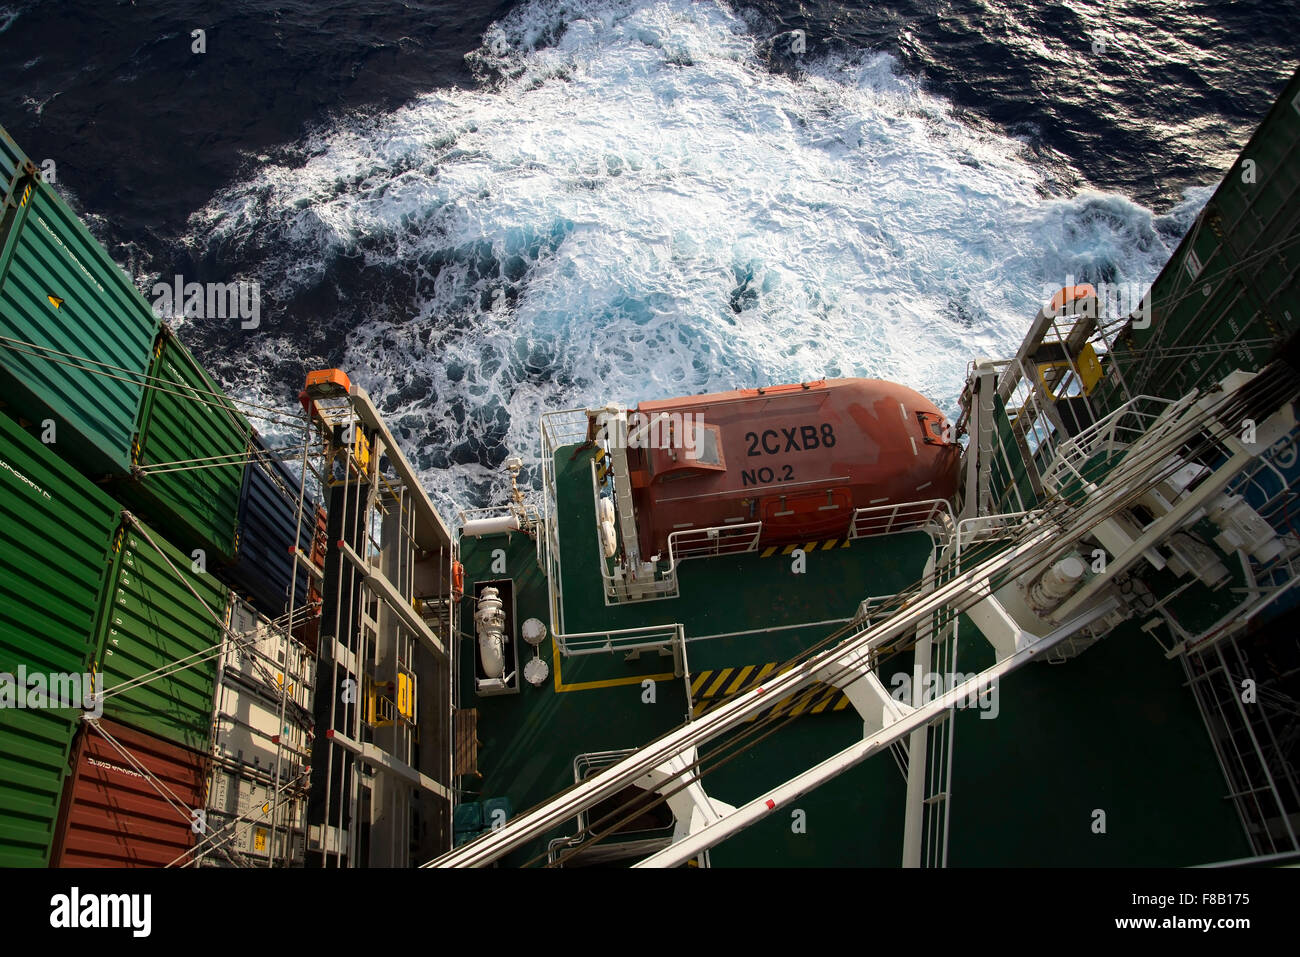 stacked containers in the stern of Corte Real ship in rough sea viewed from high up on the Bridge. Stock Photo